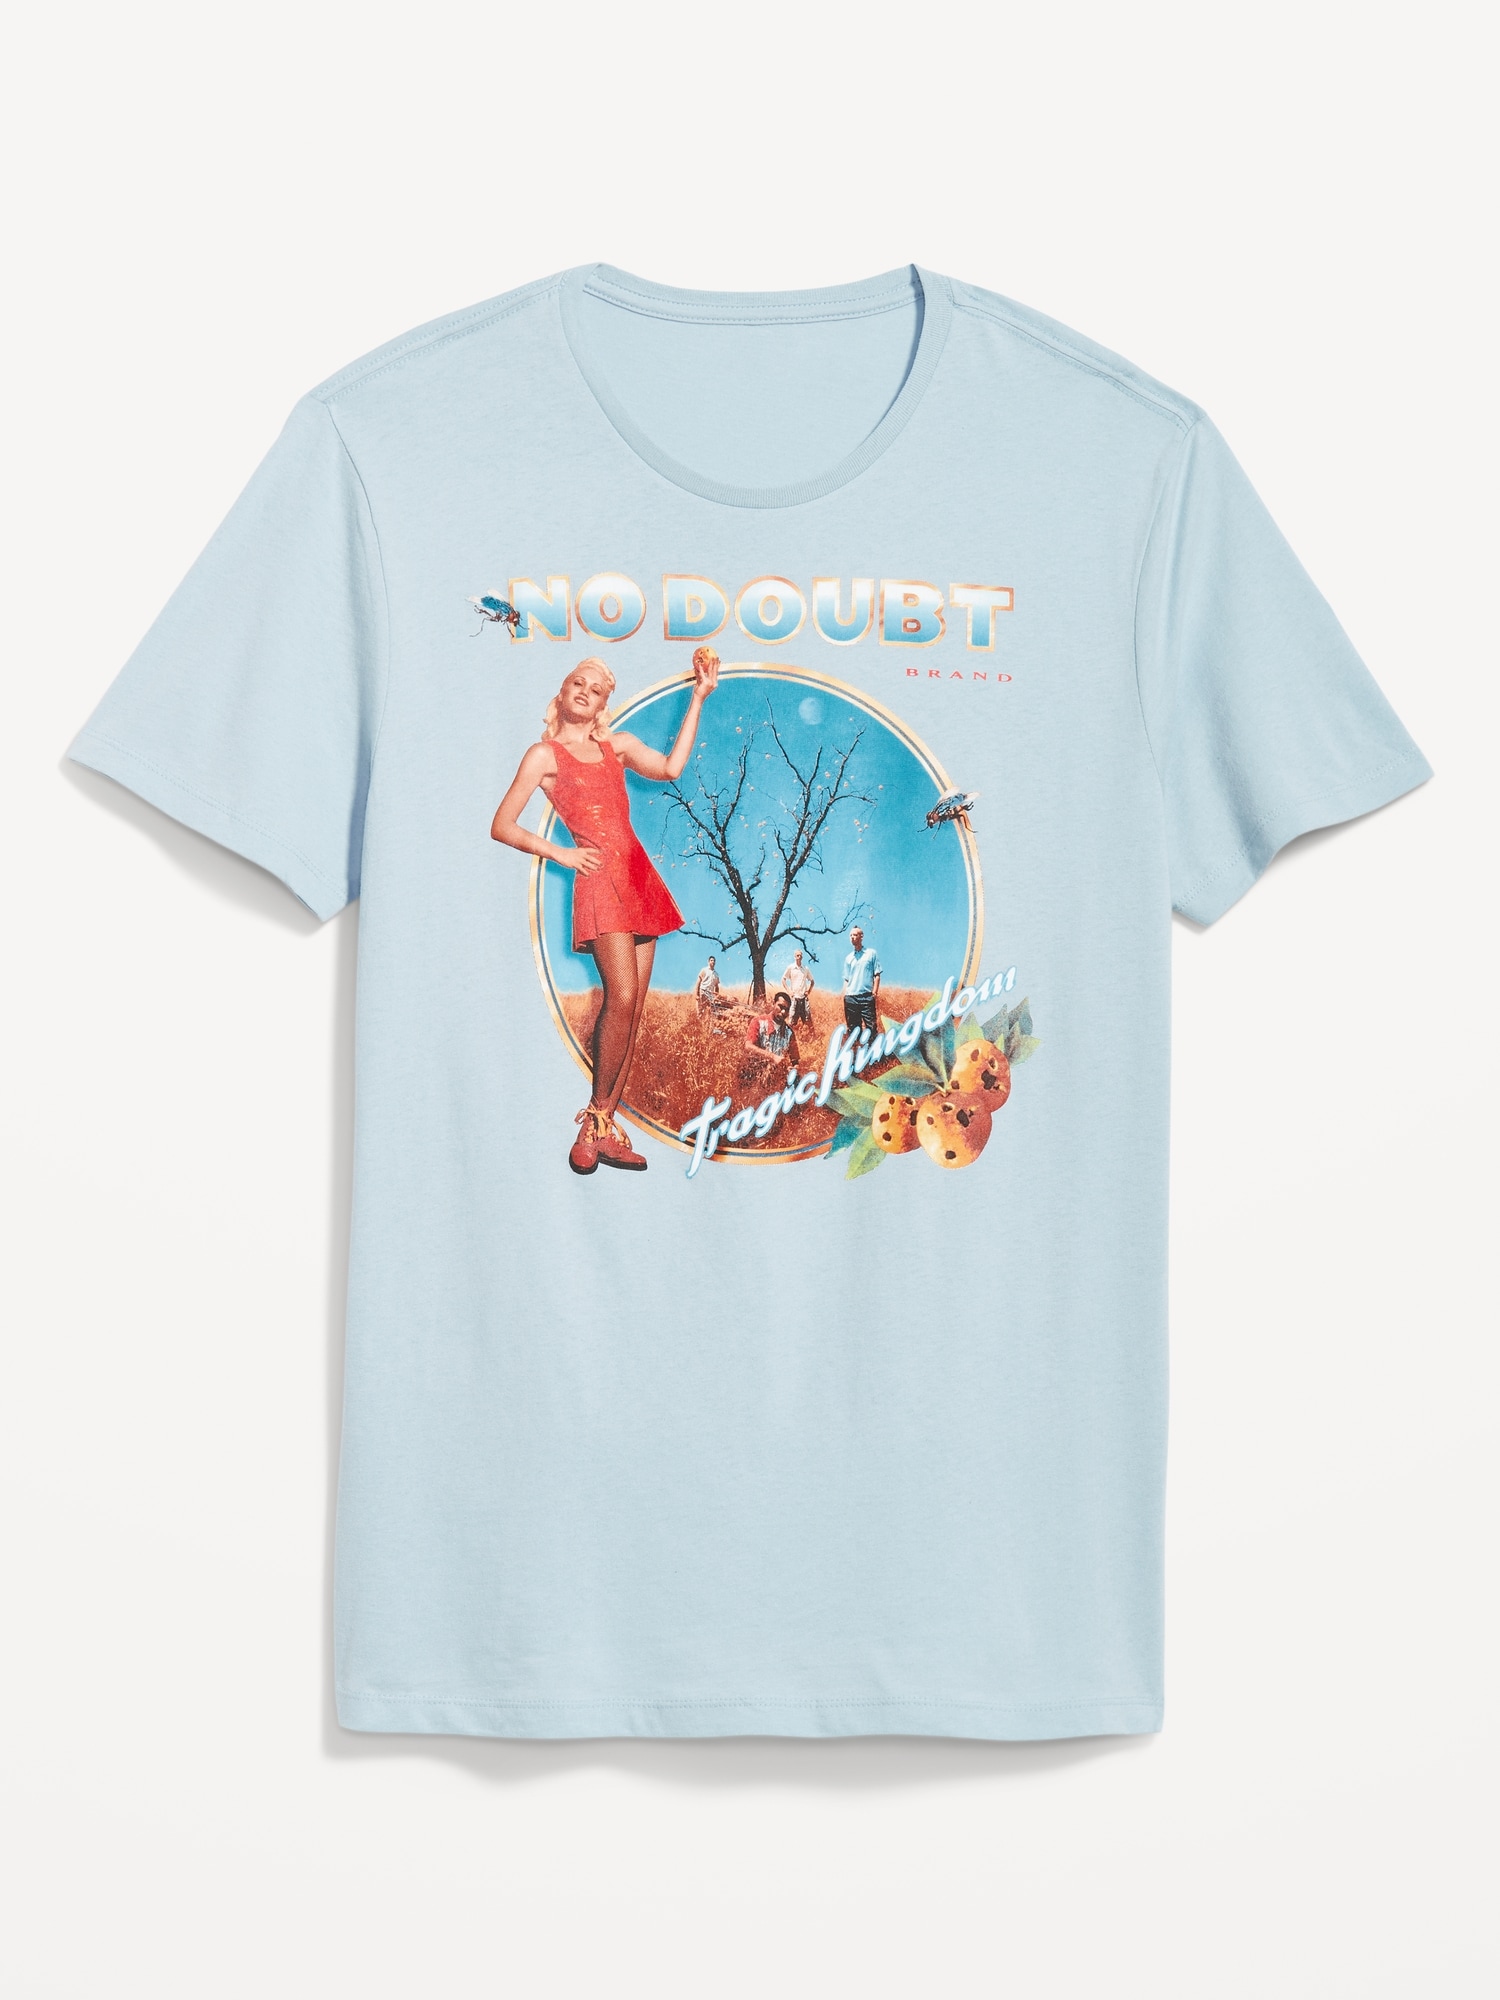 Old Navy No Doubt™ "Tragic Kingdom" Gender-Neutral T-Shirt for Adults blue. 1